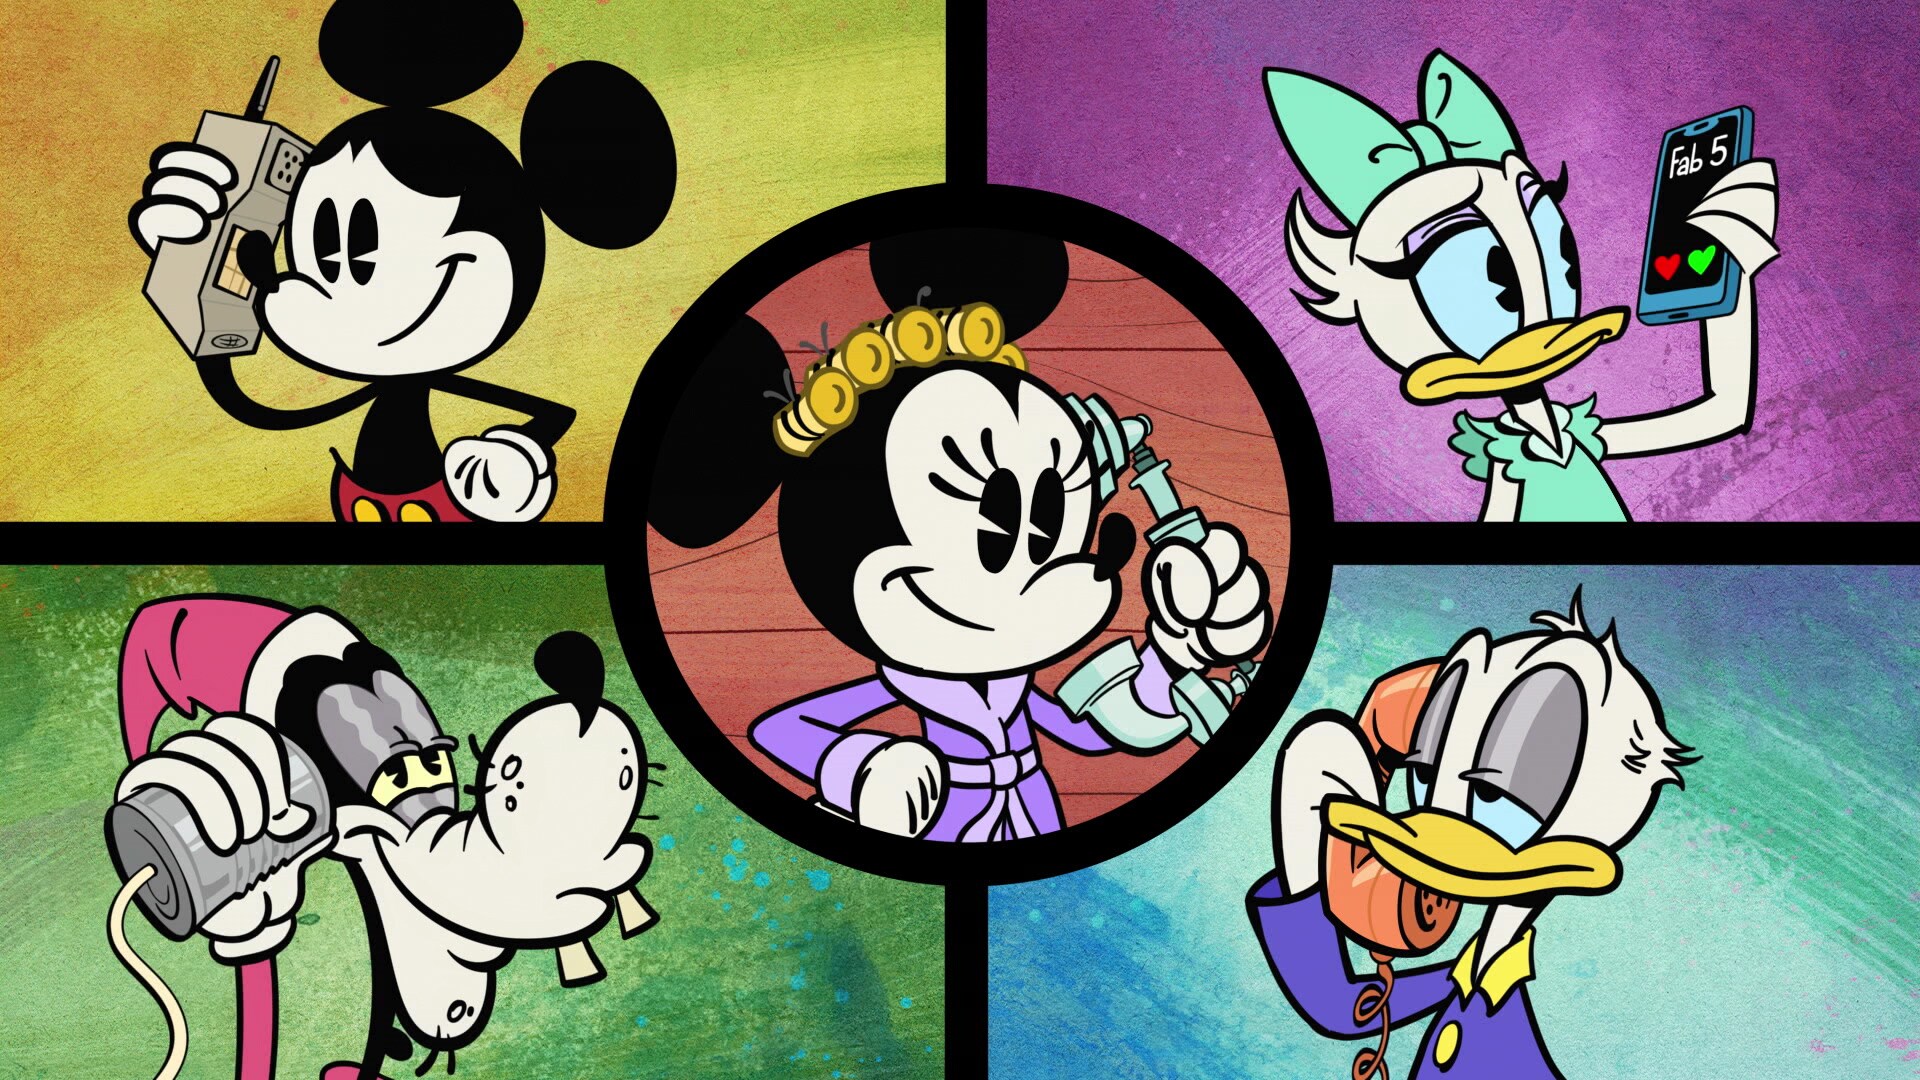 The Wonderful Summer of Mickey Mouse" finds Mickey Mouse and his friends each recalling the wild events leading up to the Annual Summer Fireworks Spectacular from their point-of-view. Coming to Disney+ July 8